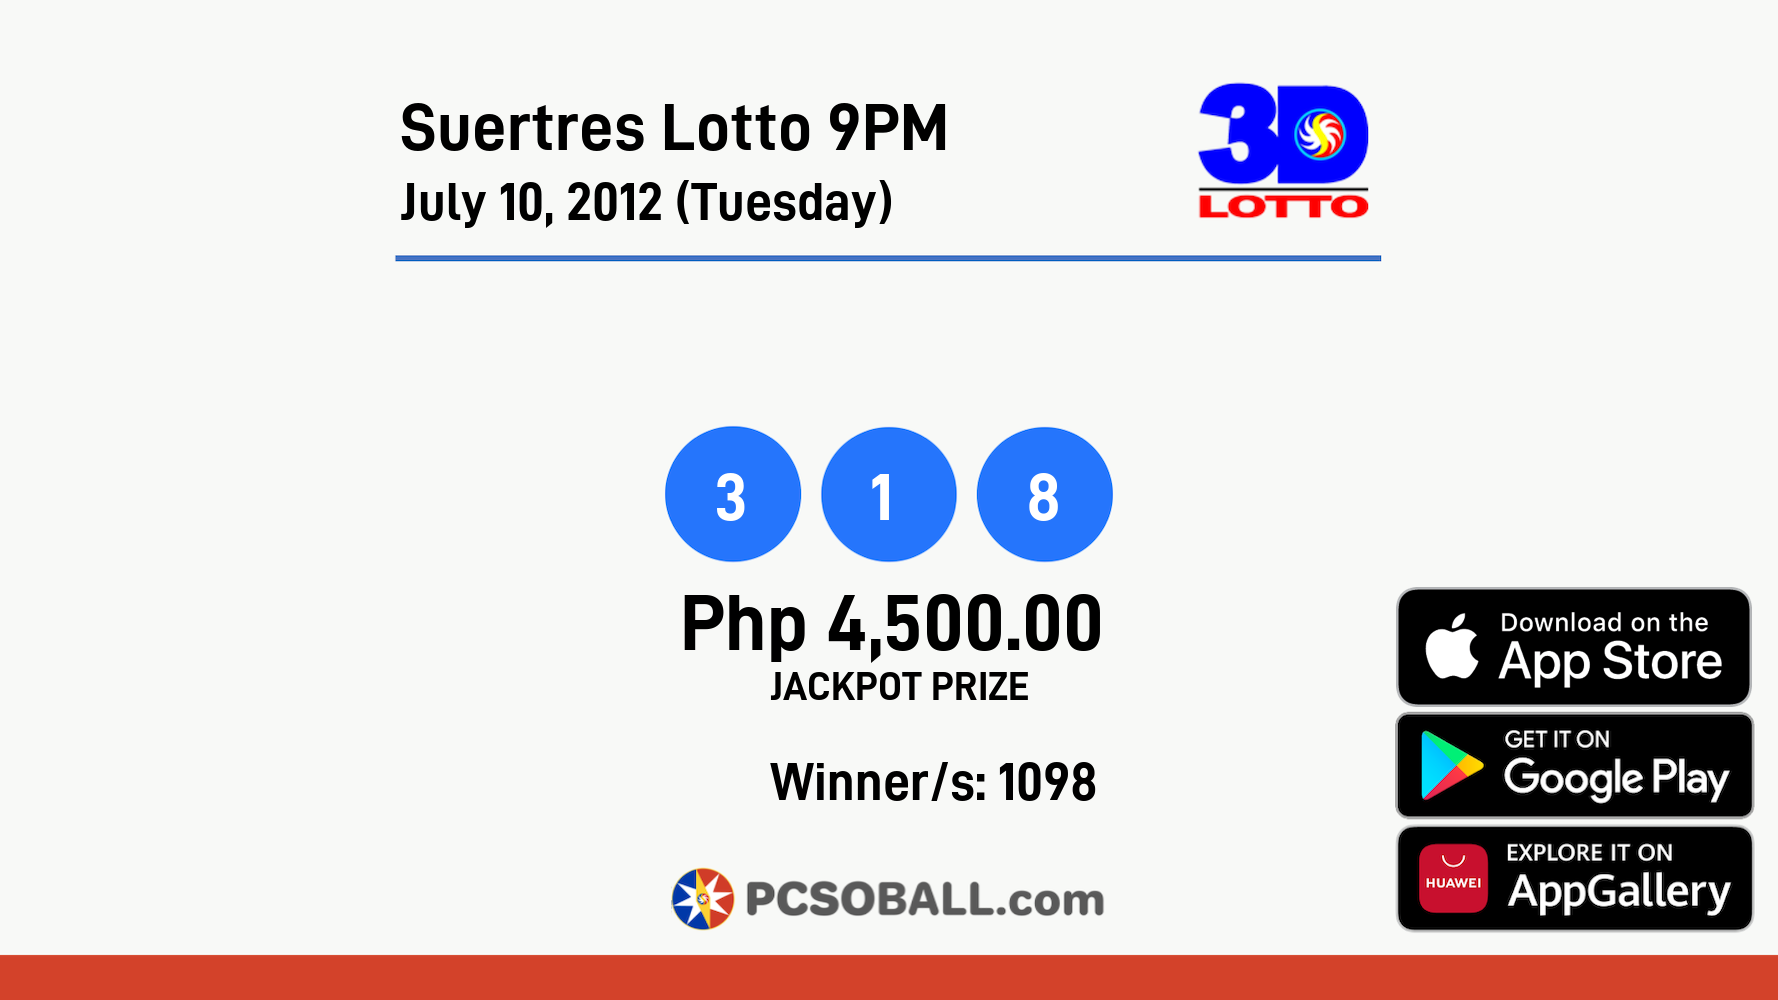 Suertres Lotto 9PM July 10, 2012 (Tuesday) Result